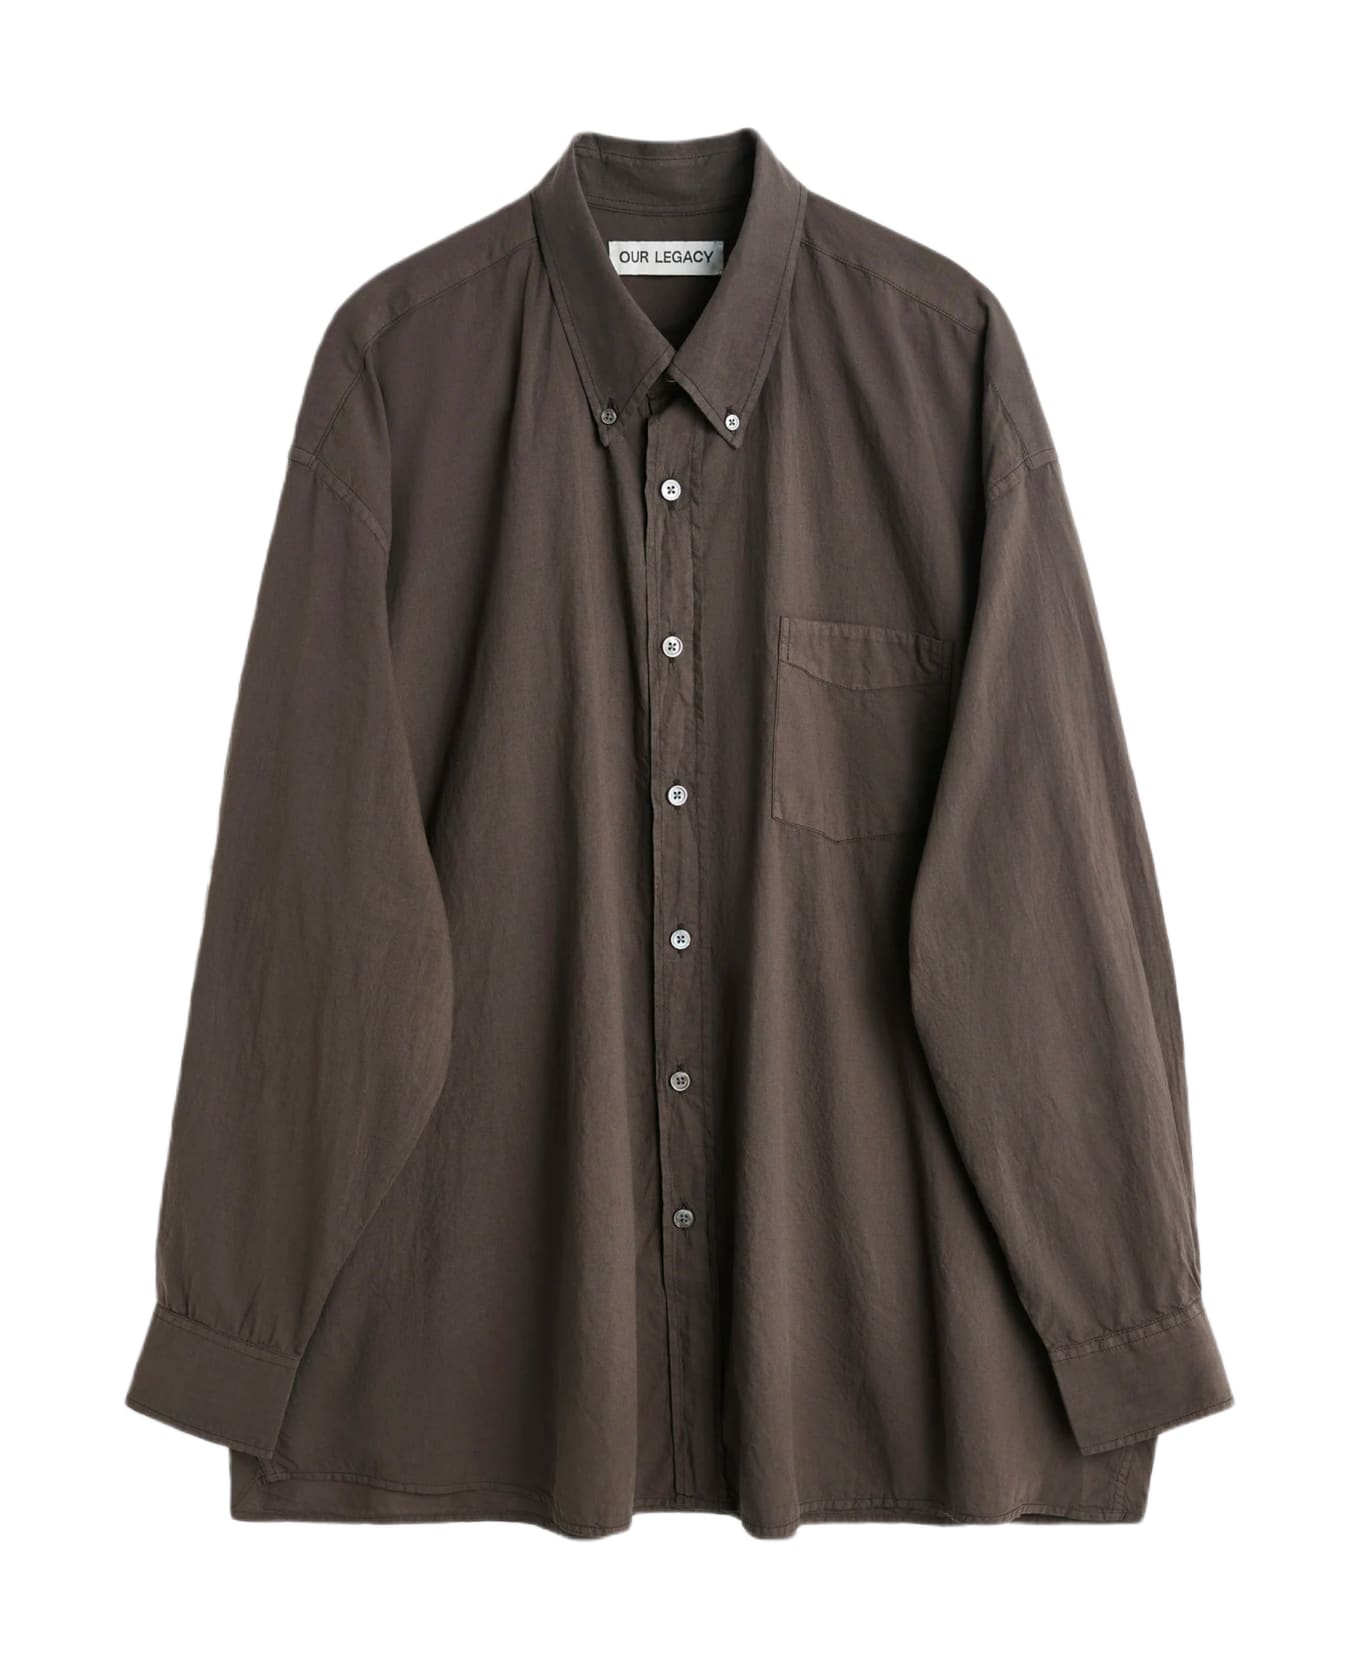 Our Legacy Borrowed Bd Shirt Faded brown lightweight cotton shirt with long sleeves - Borrowed BD Shirt - Marrone シャツ